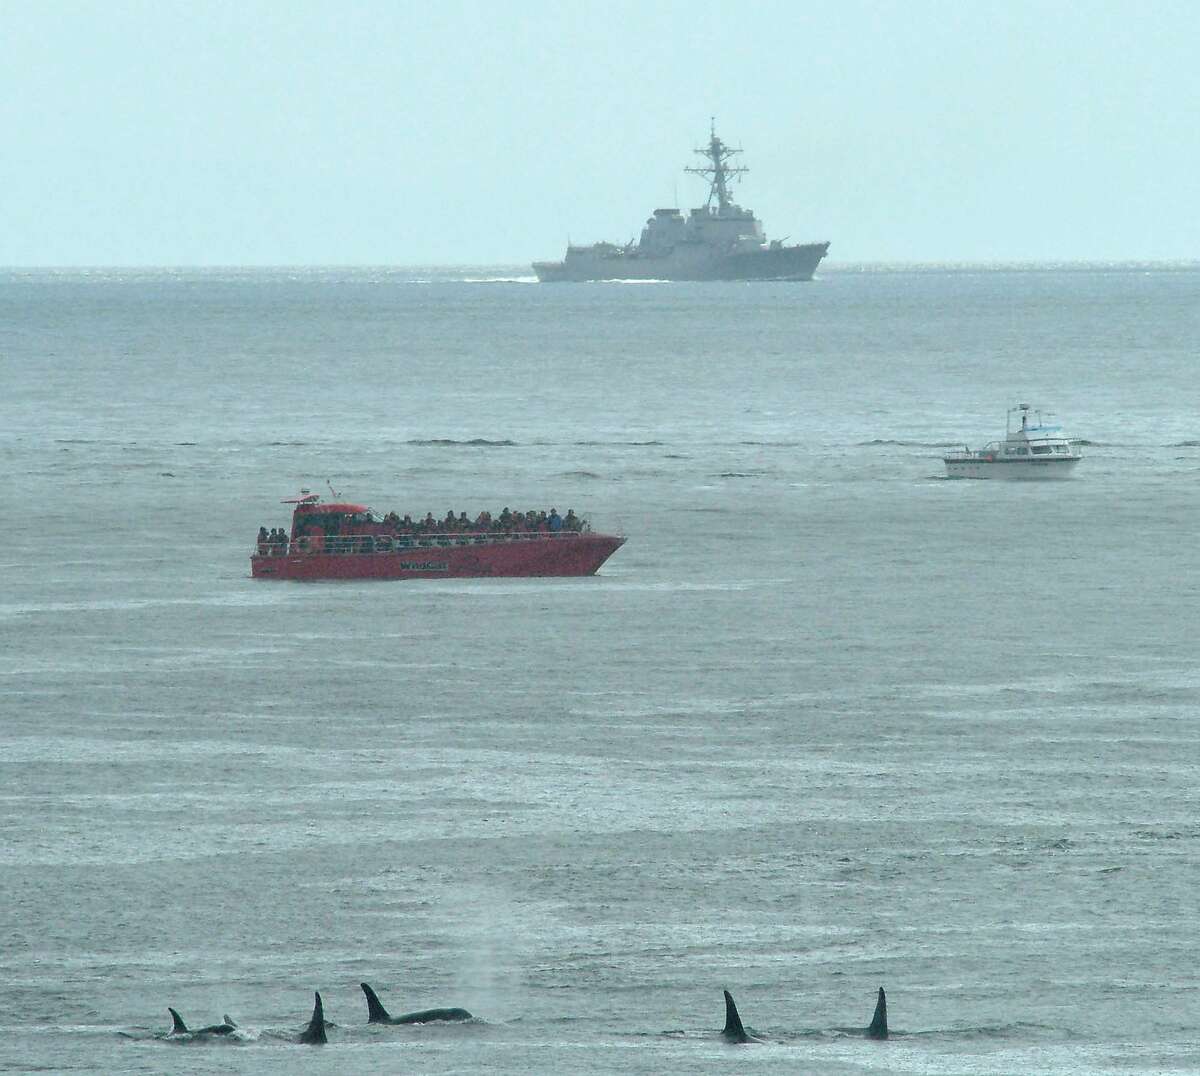 A pod of killer whales, bottom, swims near a whale-watching boat and the Everett, Wash. based destroyer USS Shoup in the Haro Strait near San Juan Island, Monday, May 5, 2003. The U.S. Navy says the destroyer was using powerful, mid-frequency sonar as it traveled through the Haro Strait to Vancouver Island at the same time that some whale watchers reported orcas and porpoises fleeing the area. (AP Photo/Center for Whale Research, Ken Balcomb)